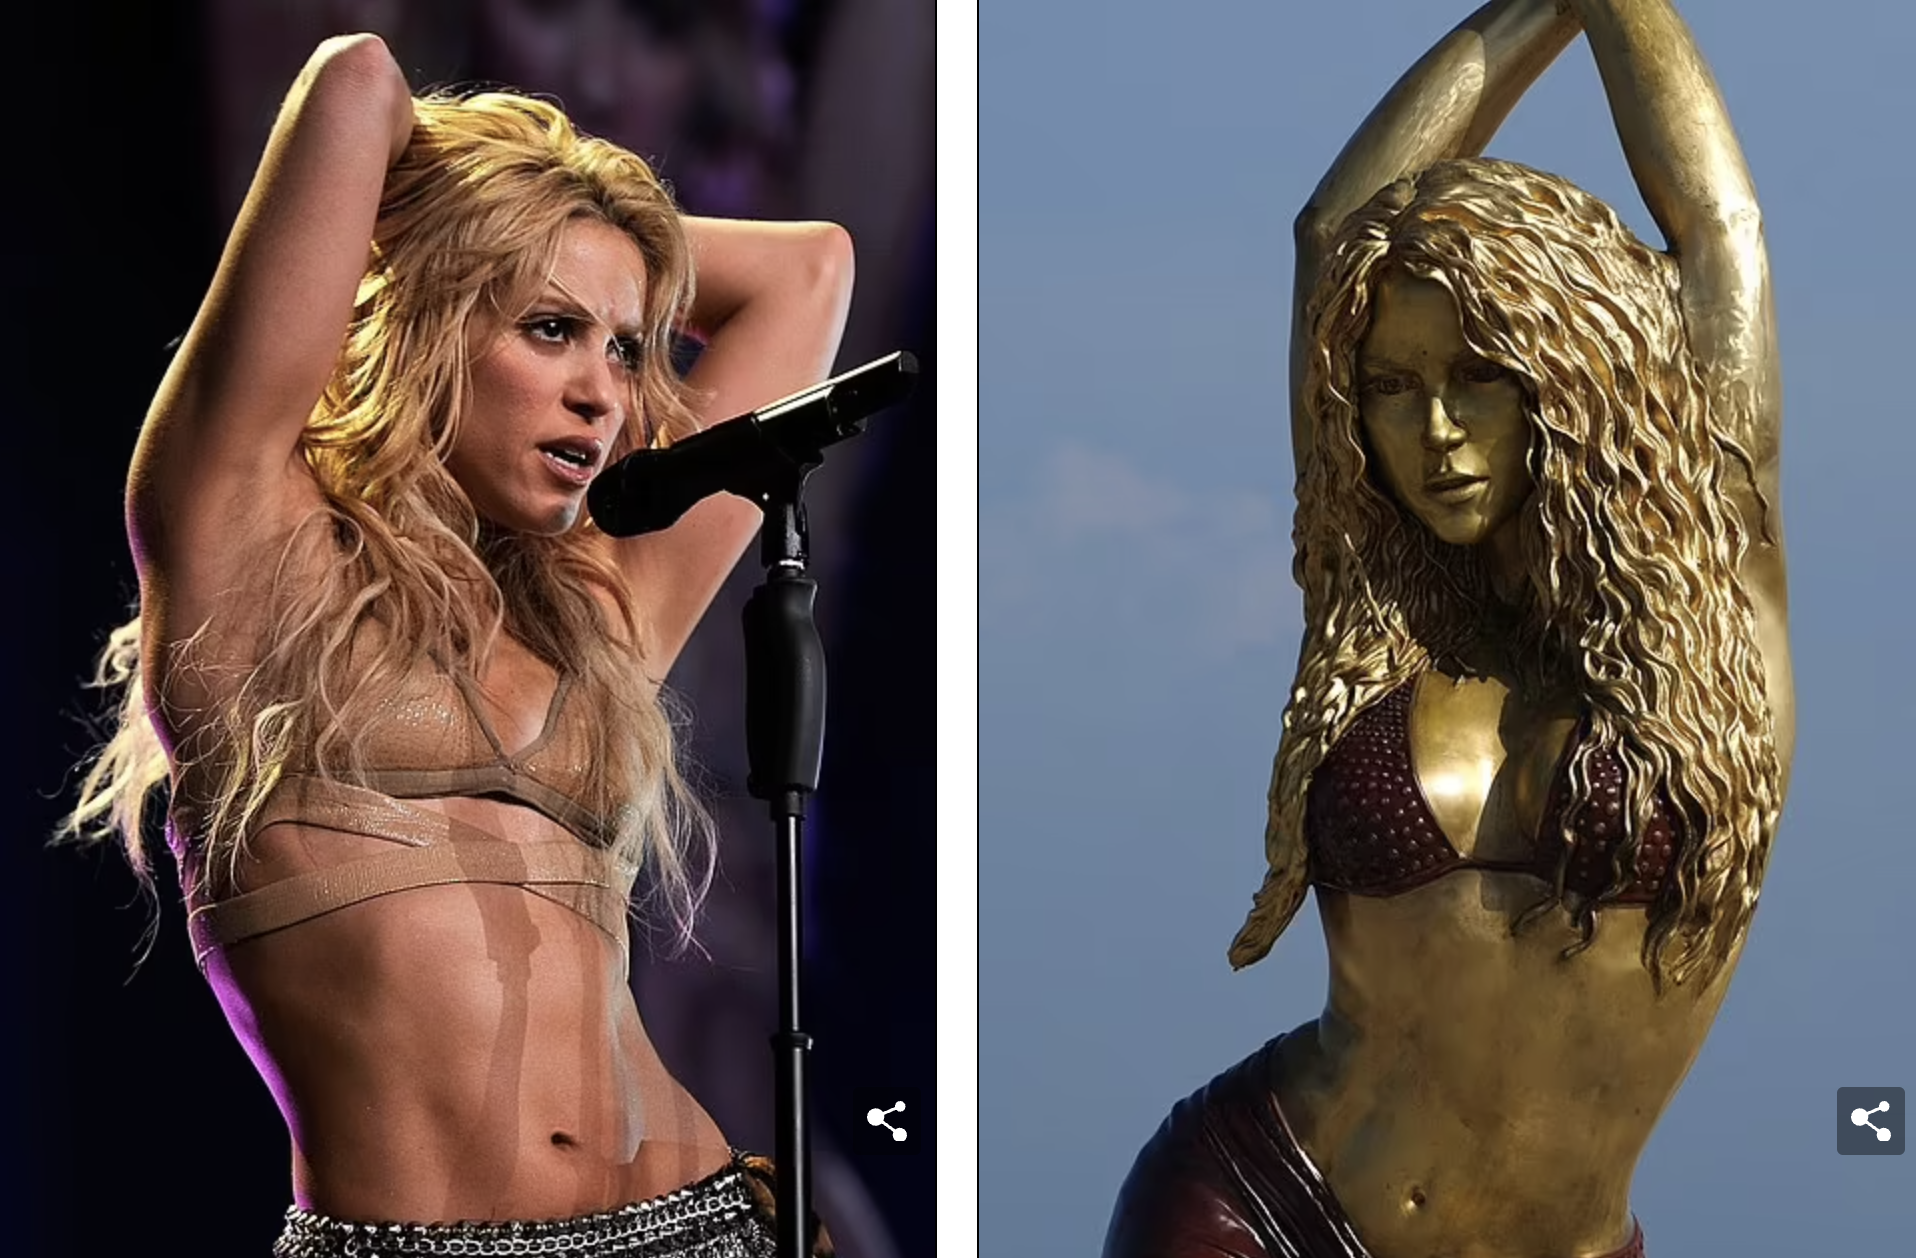 Shakira Overwhelmed as She Receives 21-Foot Bronze Statue in Colombia: ‘This Is Truly Heartfelt